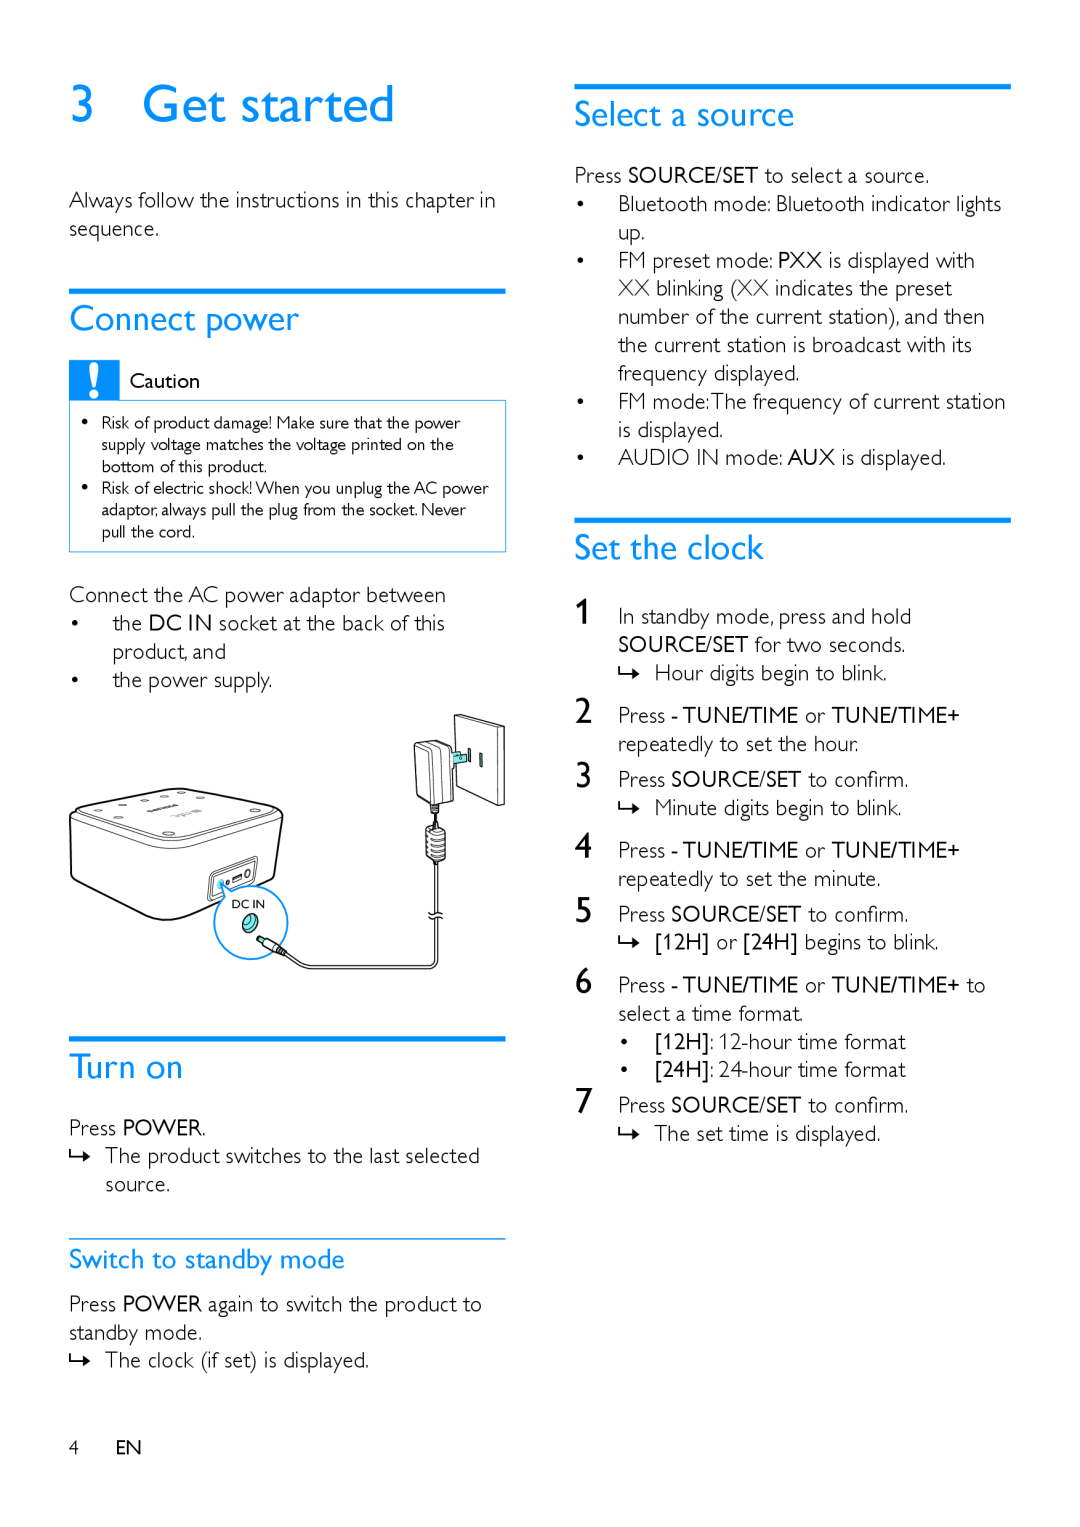 Philips SB170 user manual Get started, Connect power, Turn on, Select a source, Set the clock, Switch to standby mode 